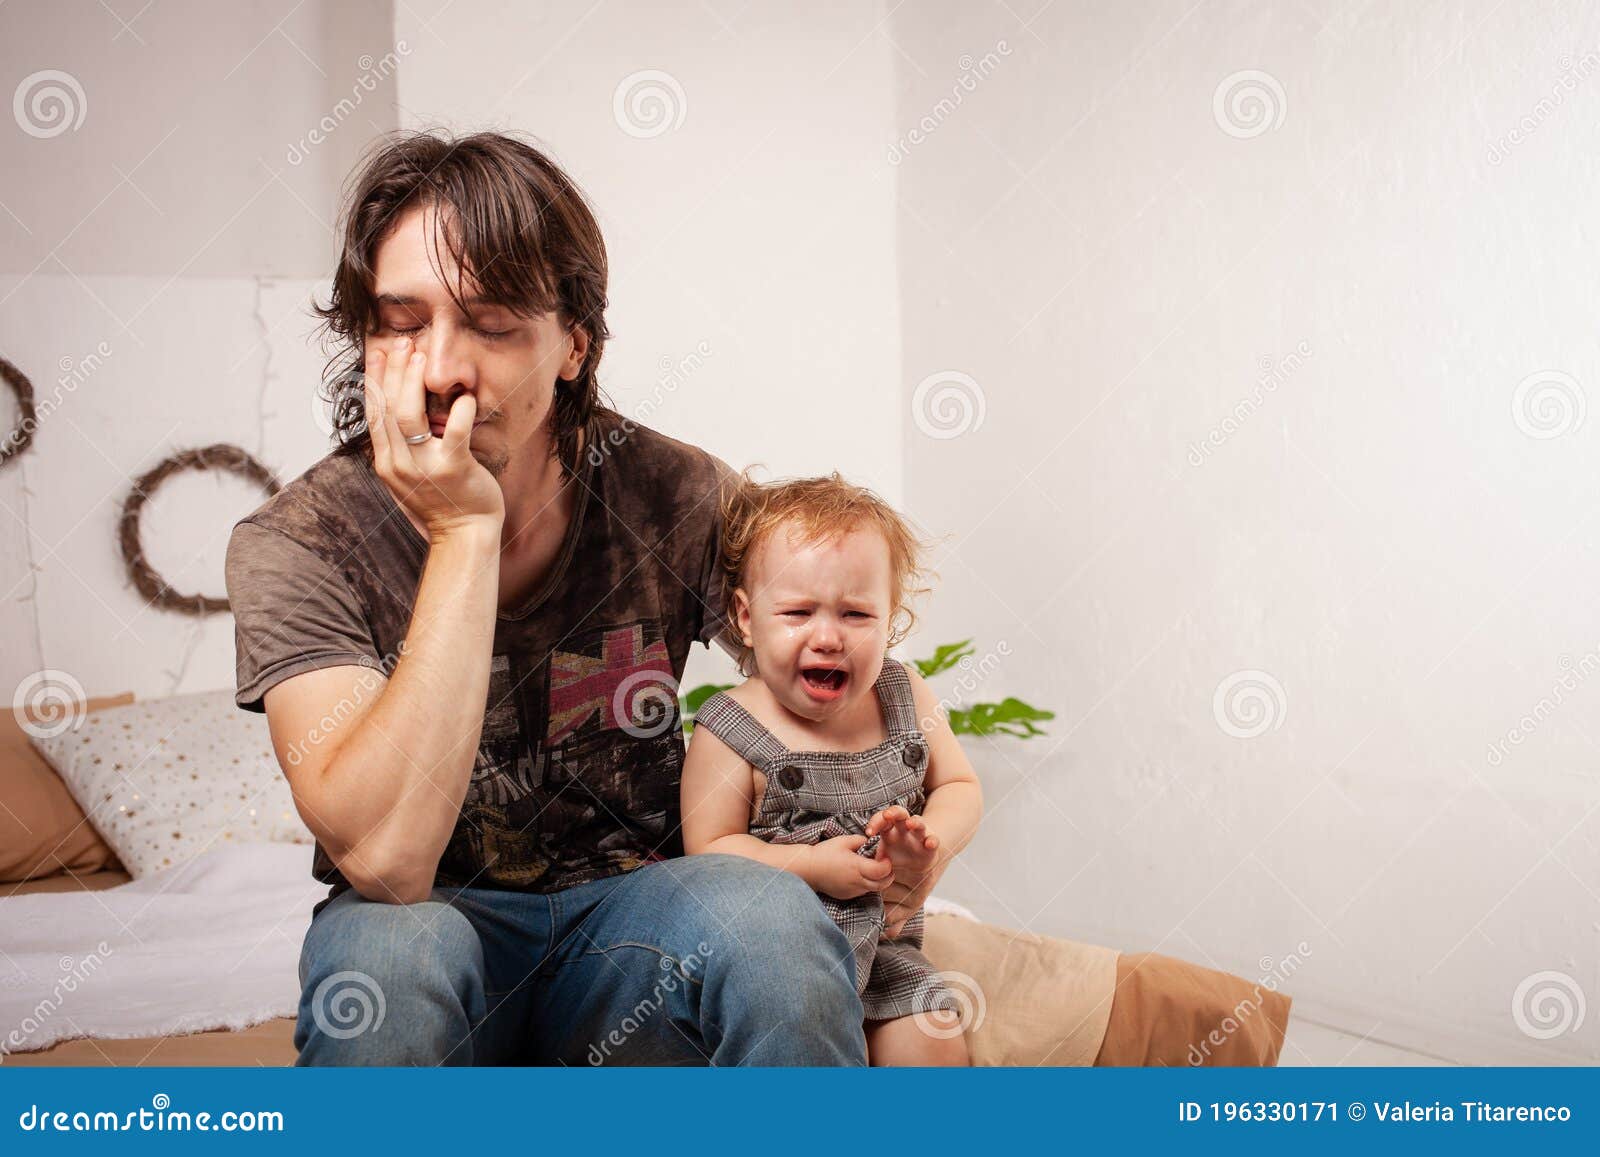 the child is screaming, hysterical. a tired dad doesn`t want to hear the baby. the parent is irritated, tired, wants to take a